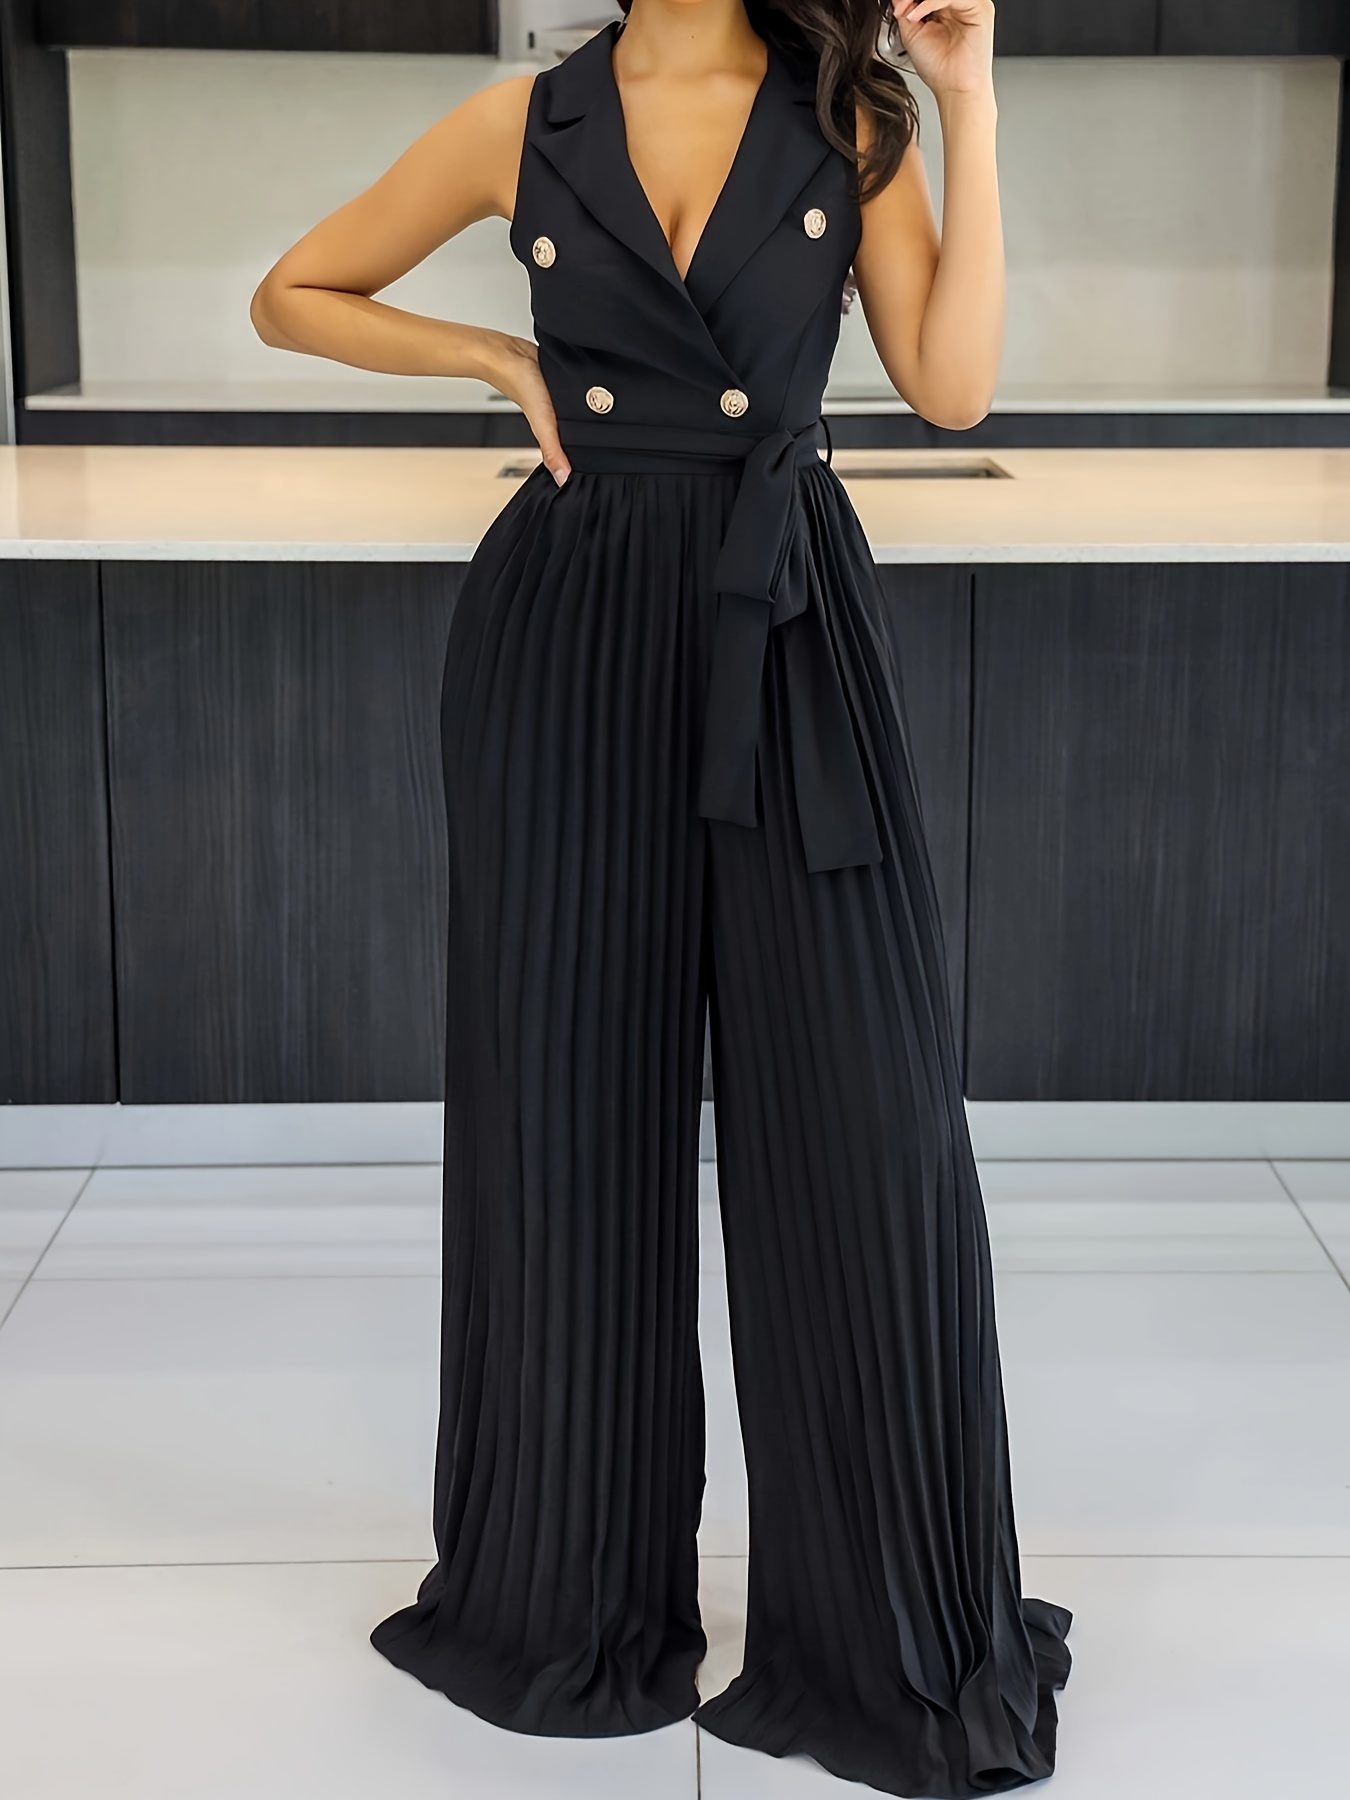 Summer Dresses for Women Women Pleated 2 Piece Pants Outfits Casual Loose  Button Shirt Blouse Top Long Wide Leg Palazzo Pants Set Jumpsuit Fall  Attire